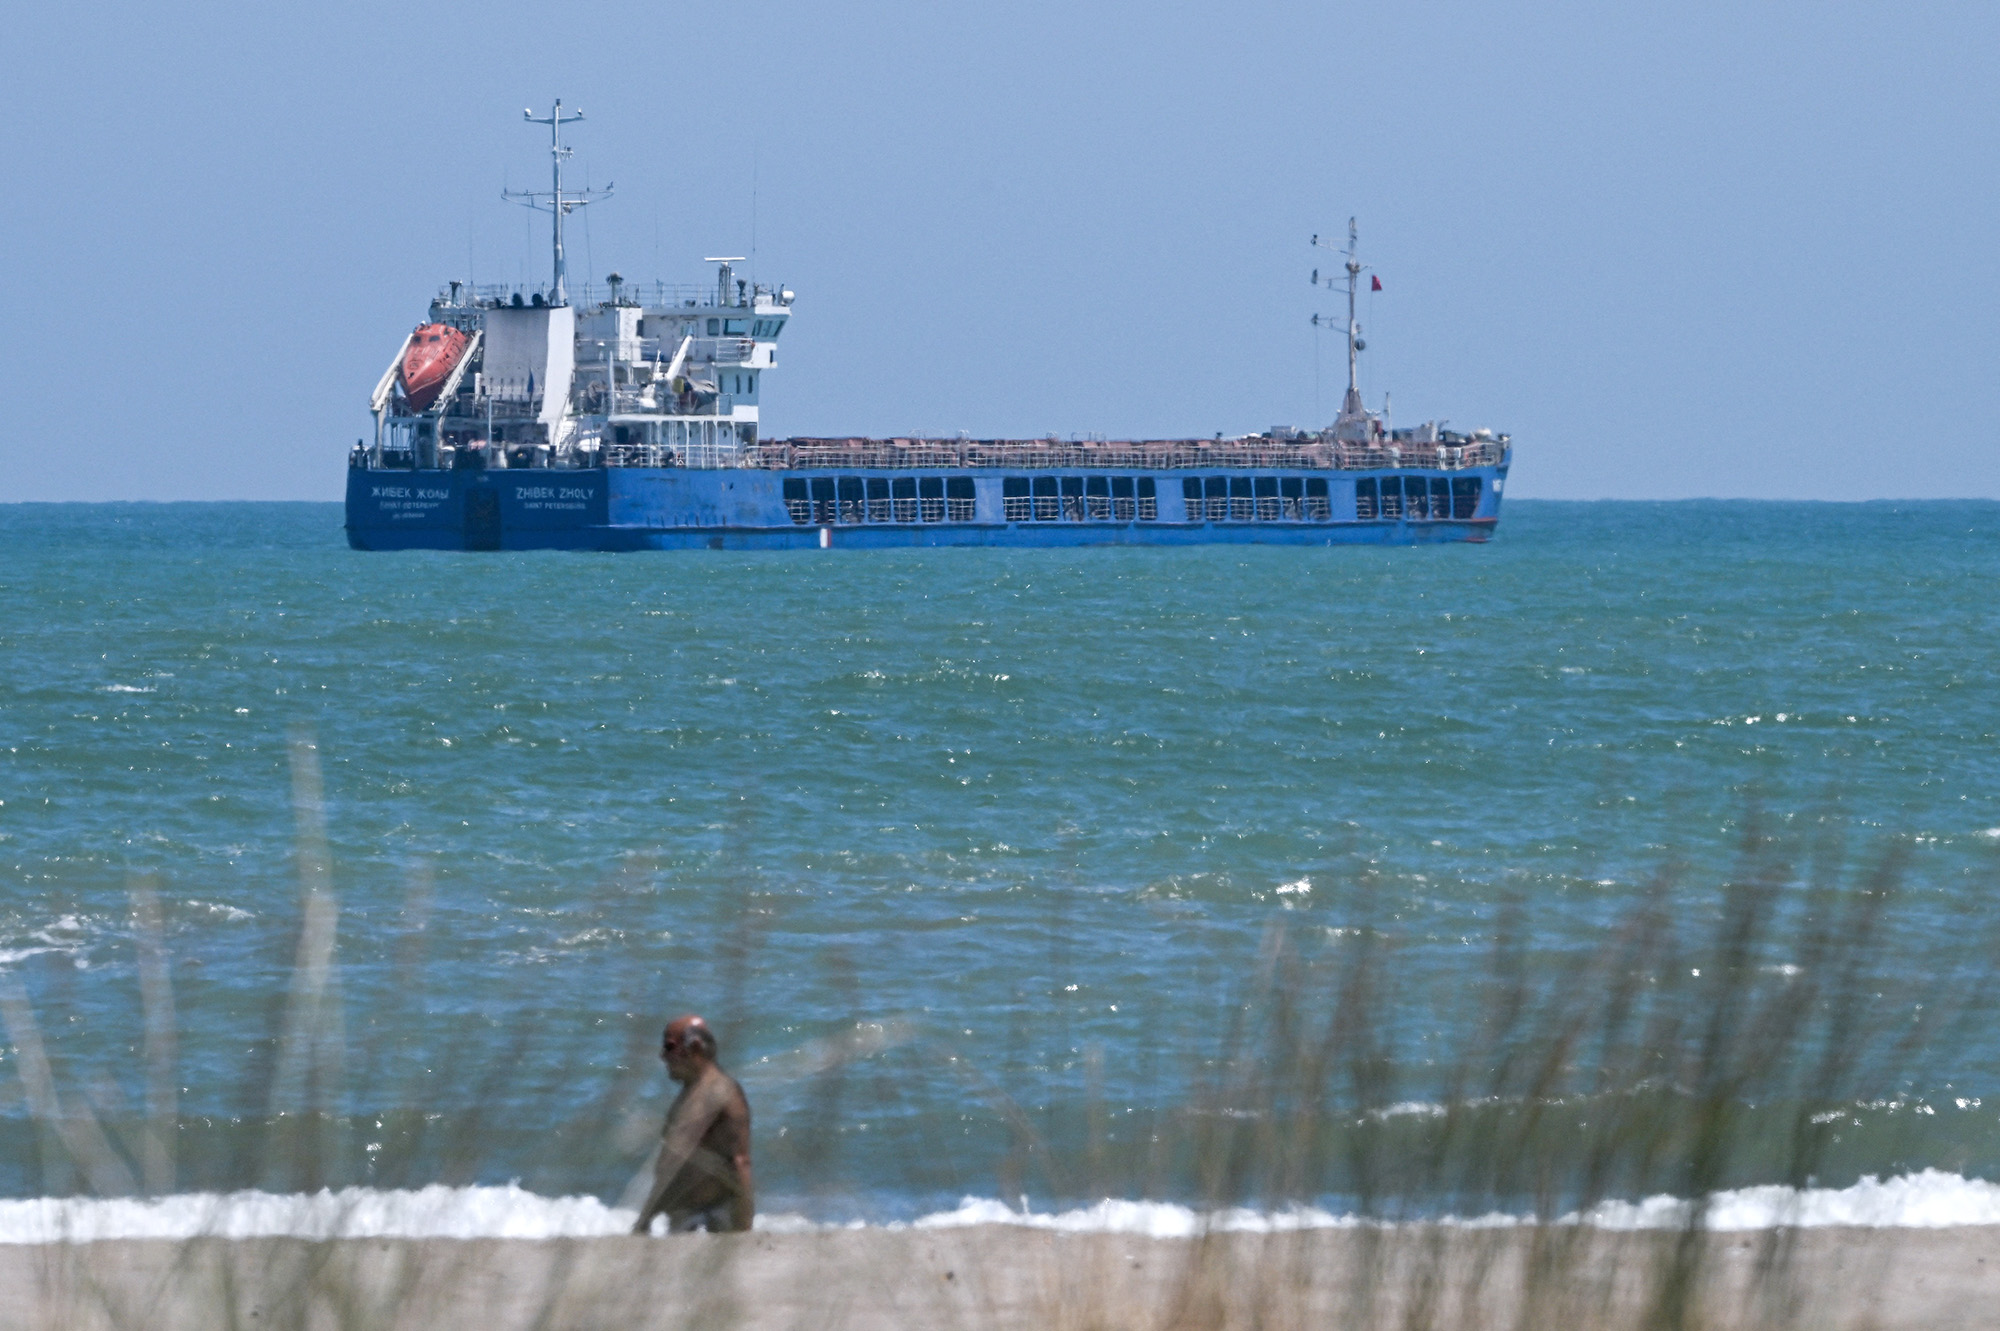 The cargo ship flying the Russian flag "Zhibek Zholy" is anchored off the Black Sea coast, Turkey, on July 5.